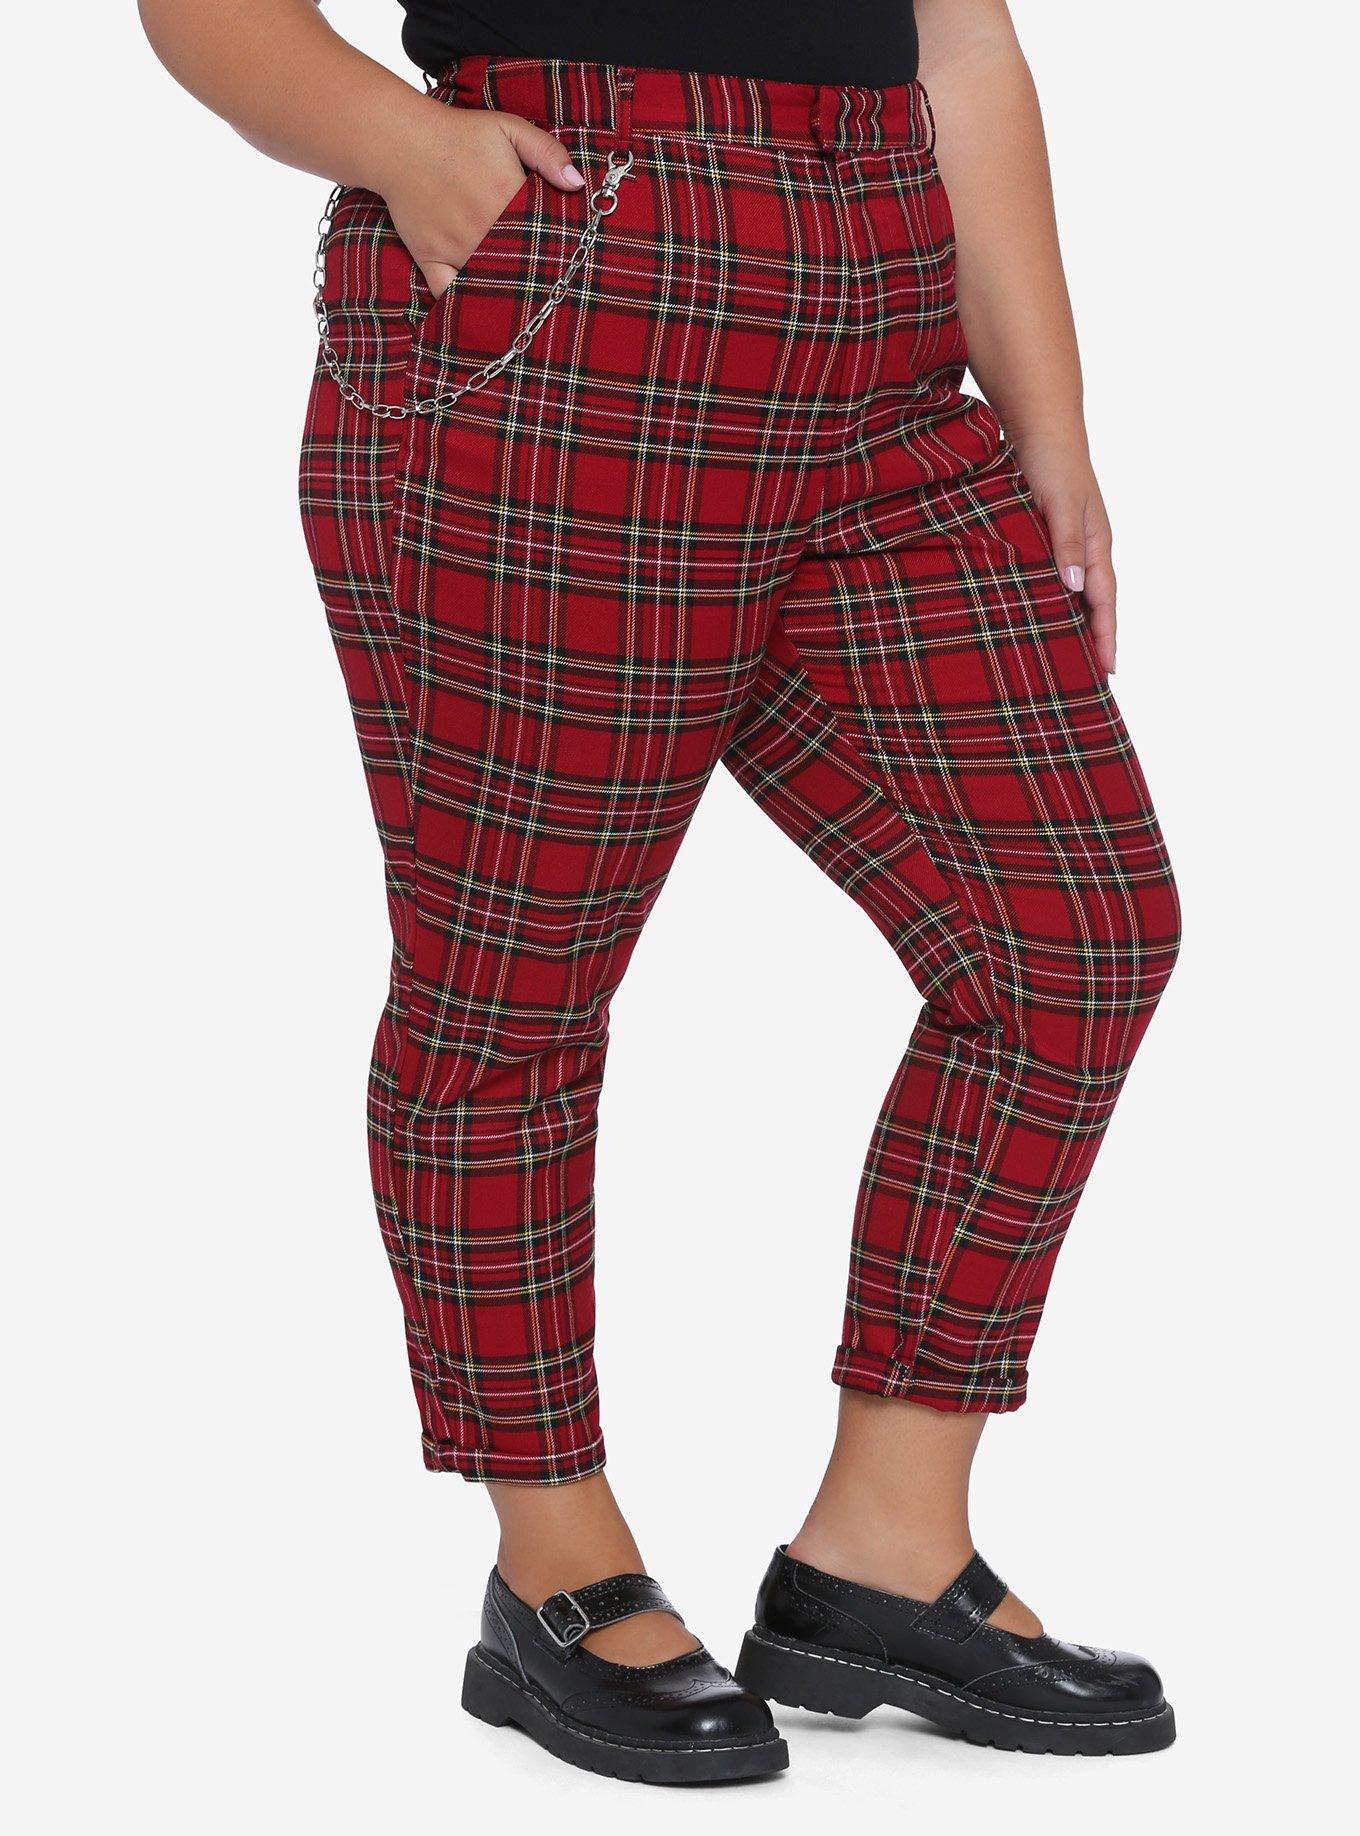 Hot Topic Red Plaid Pants Size Small Gothic Punk Emo